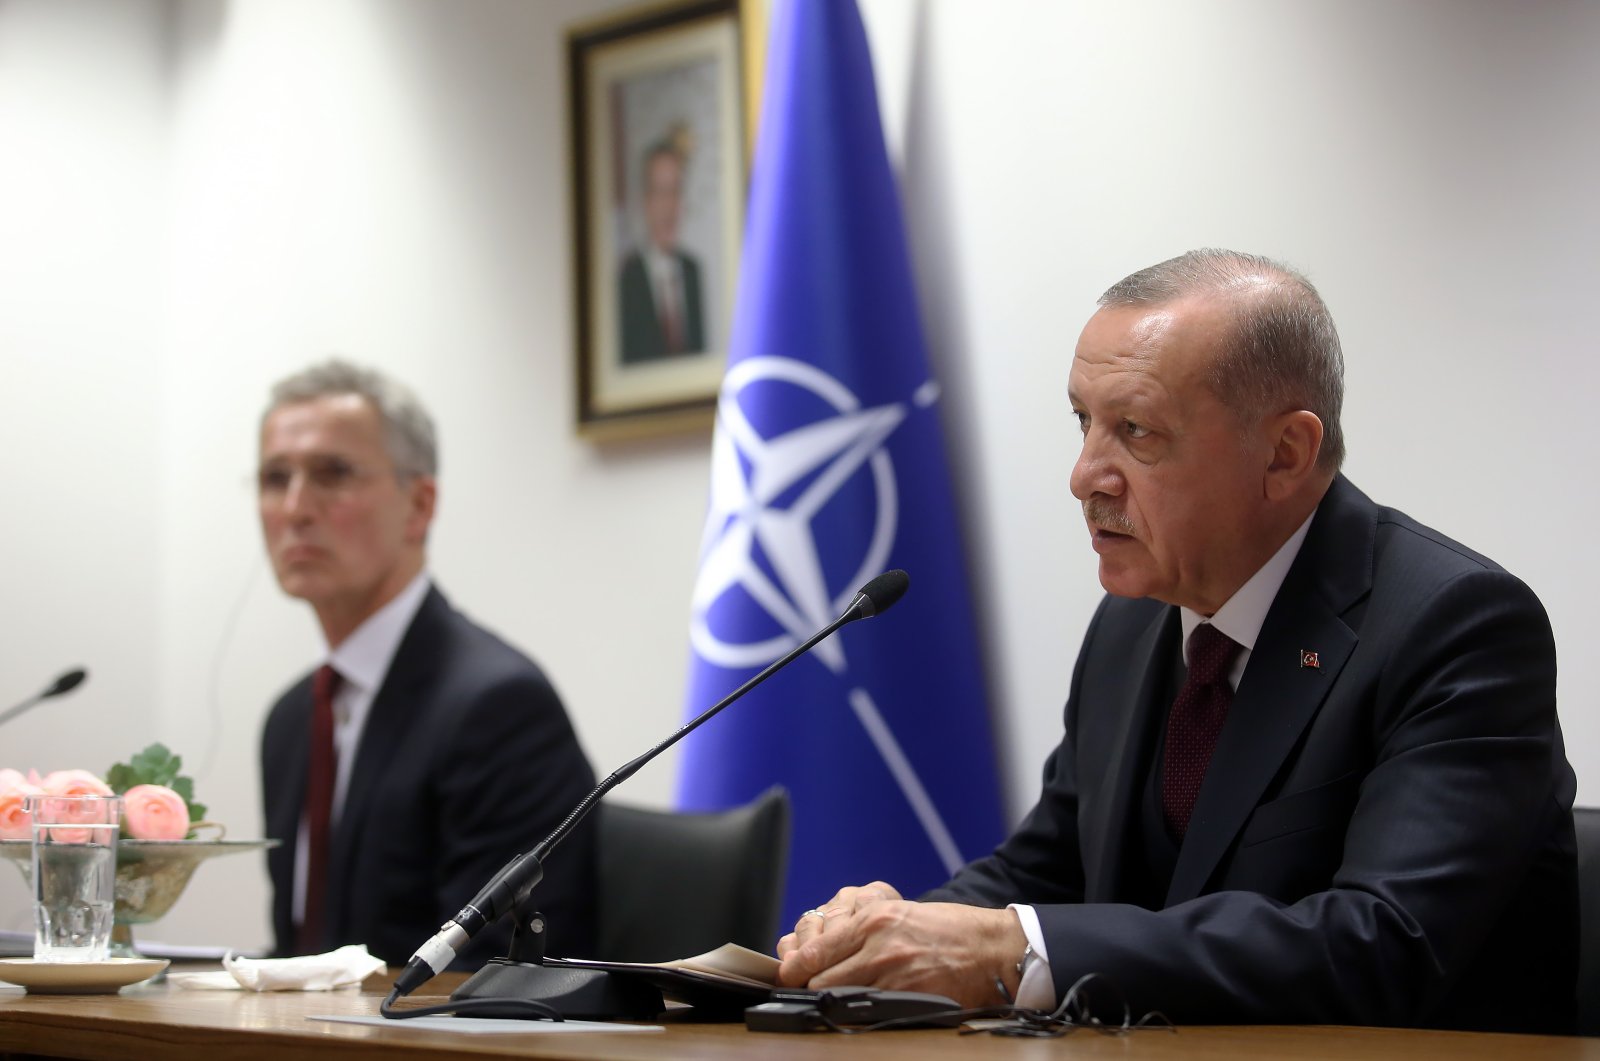 President Erdoğan speaks at a joint conference with NATO Secretary-General Jens Stoltenberg in Brussels, March 9, 2020. (DHA Photo)